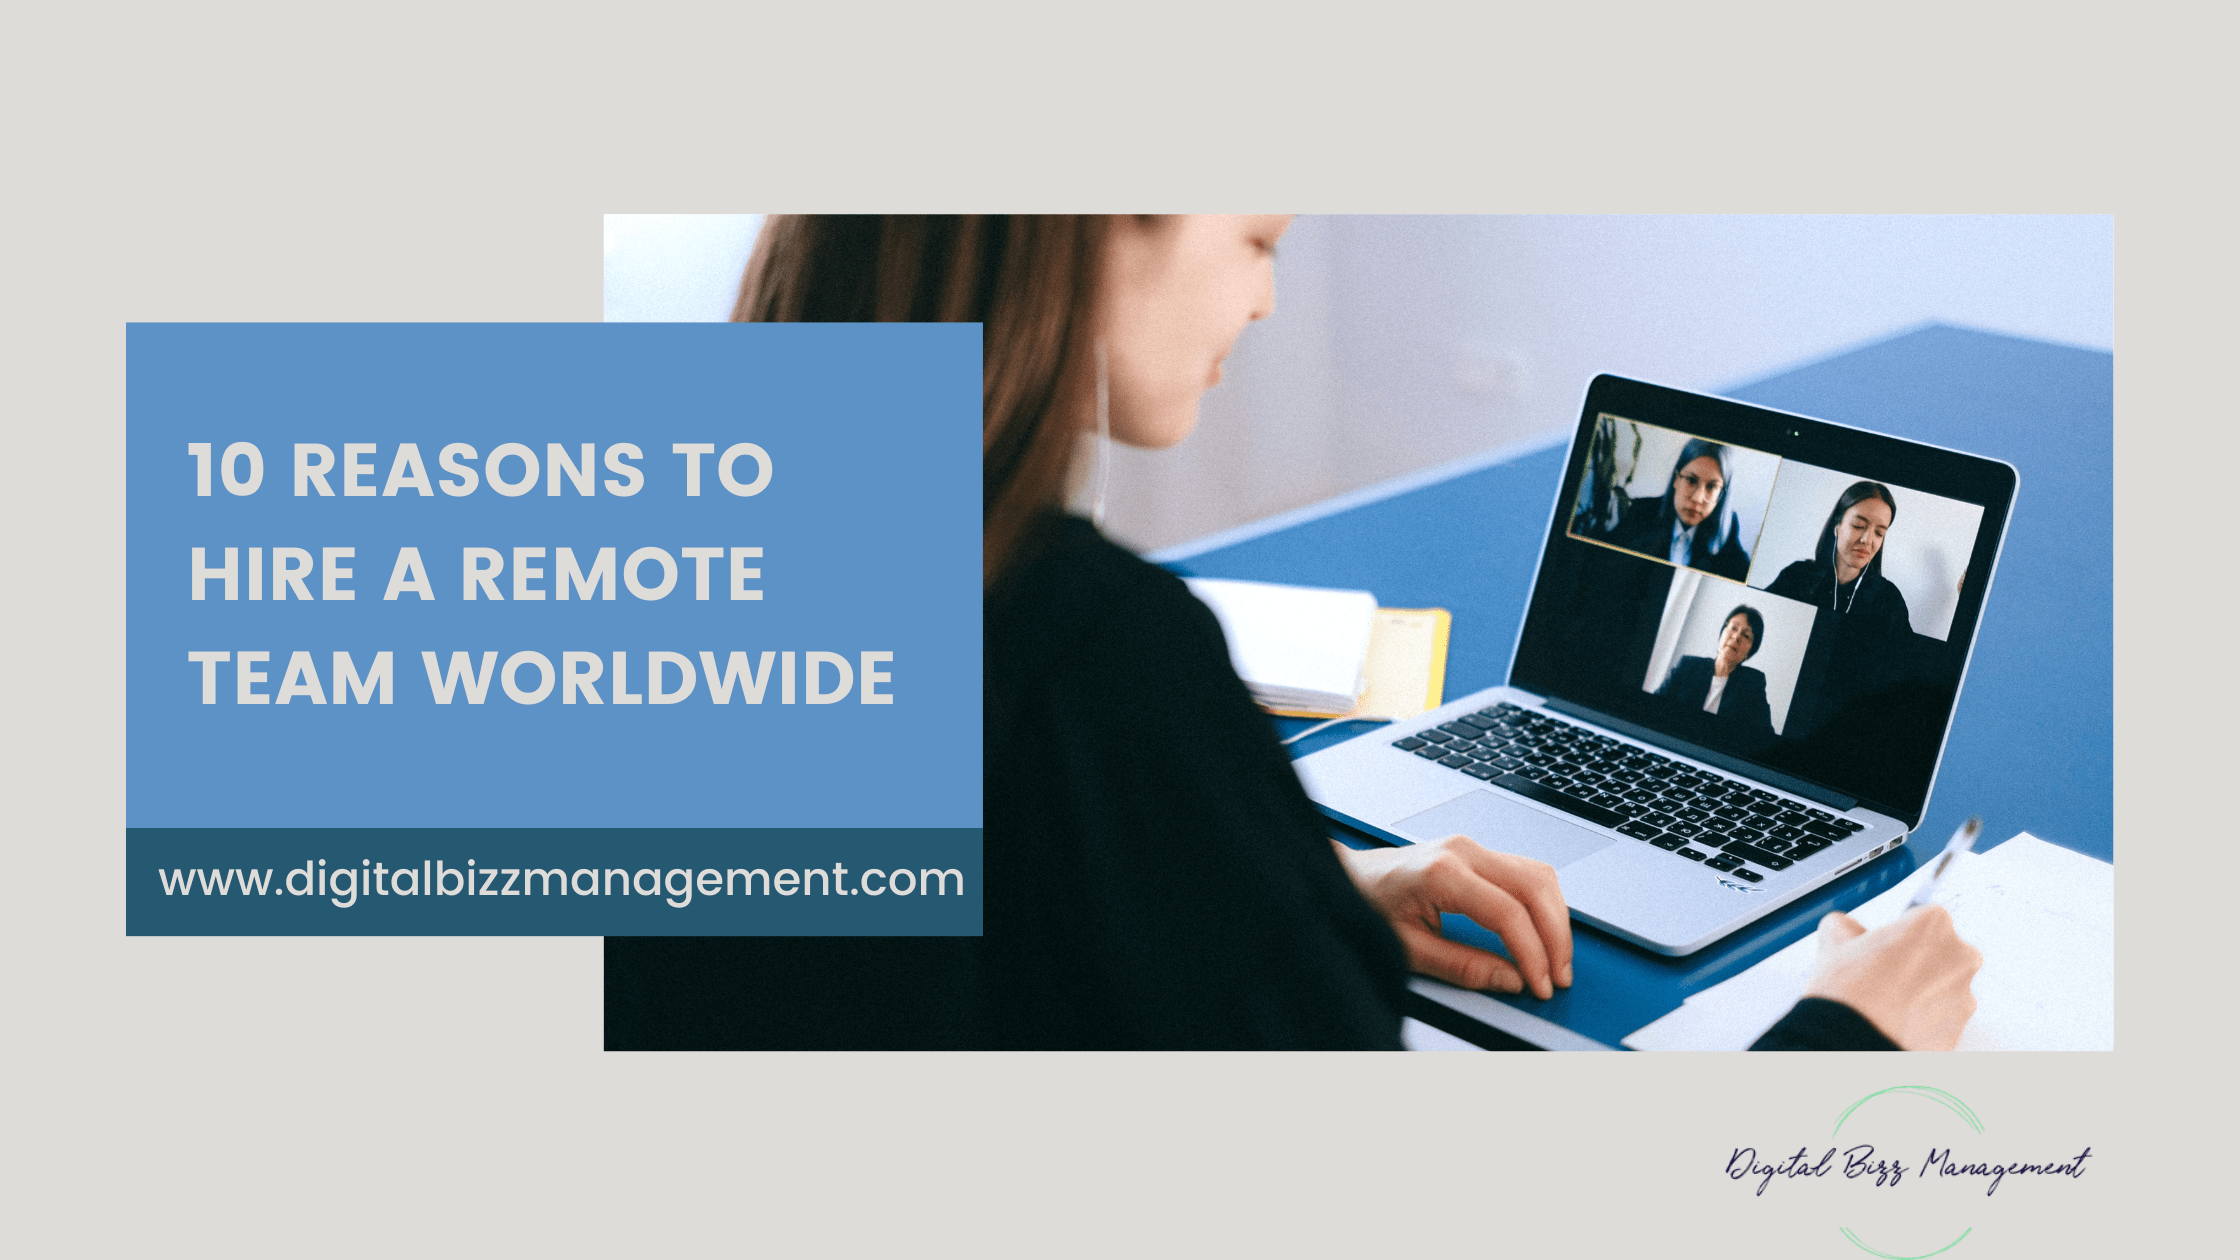 10 Reasons to Hire a Remote Team Worldwide